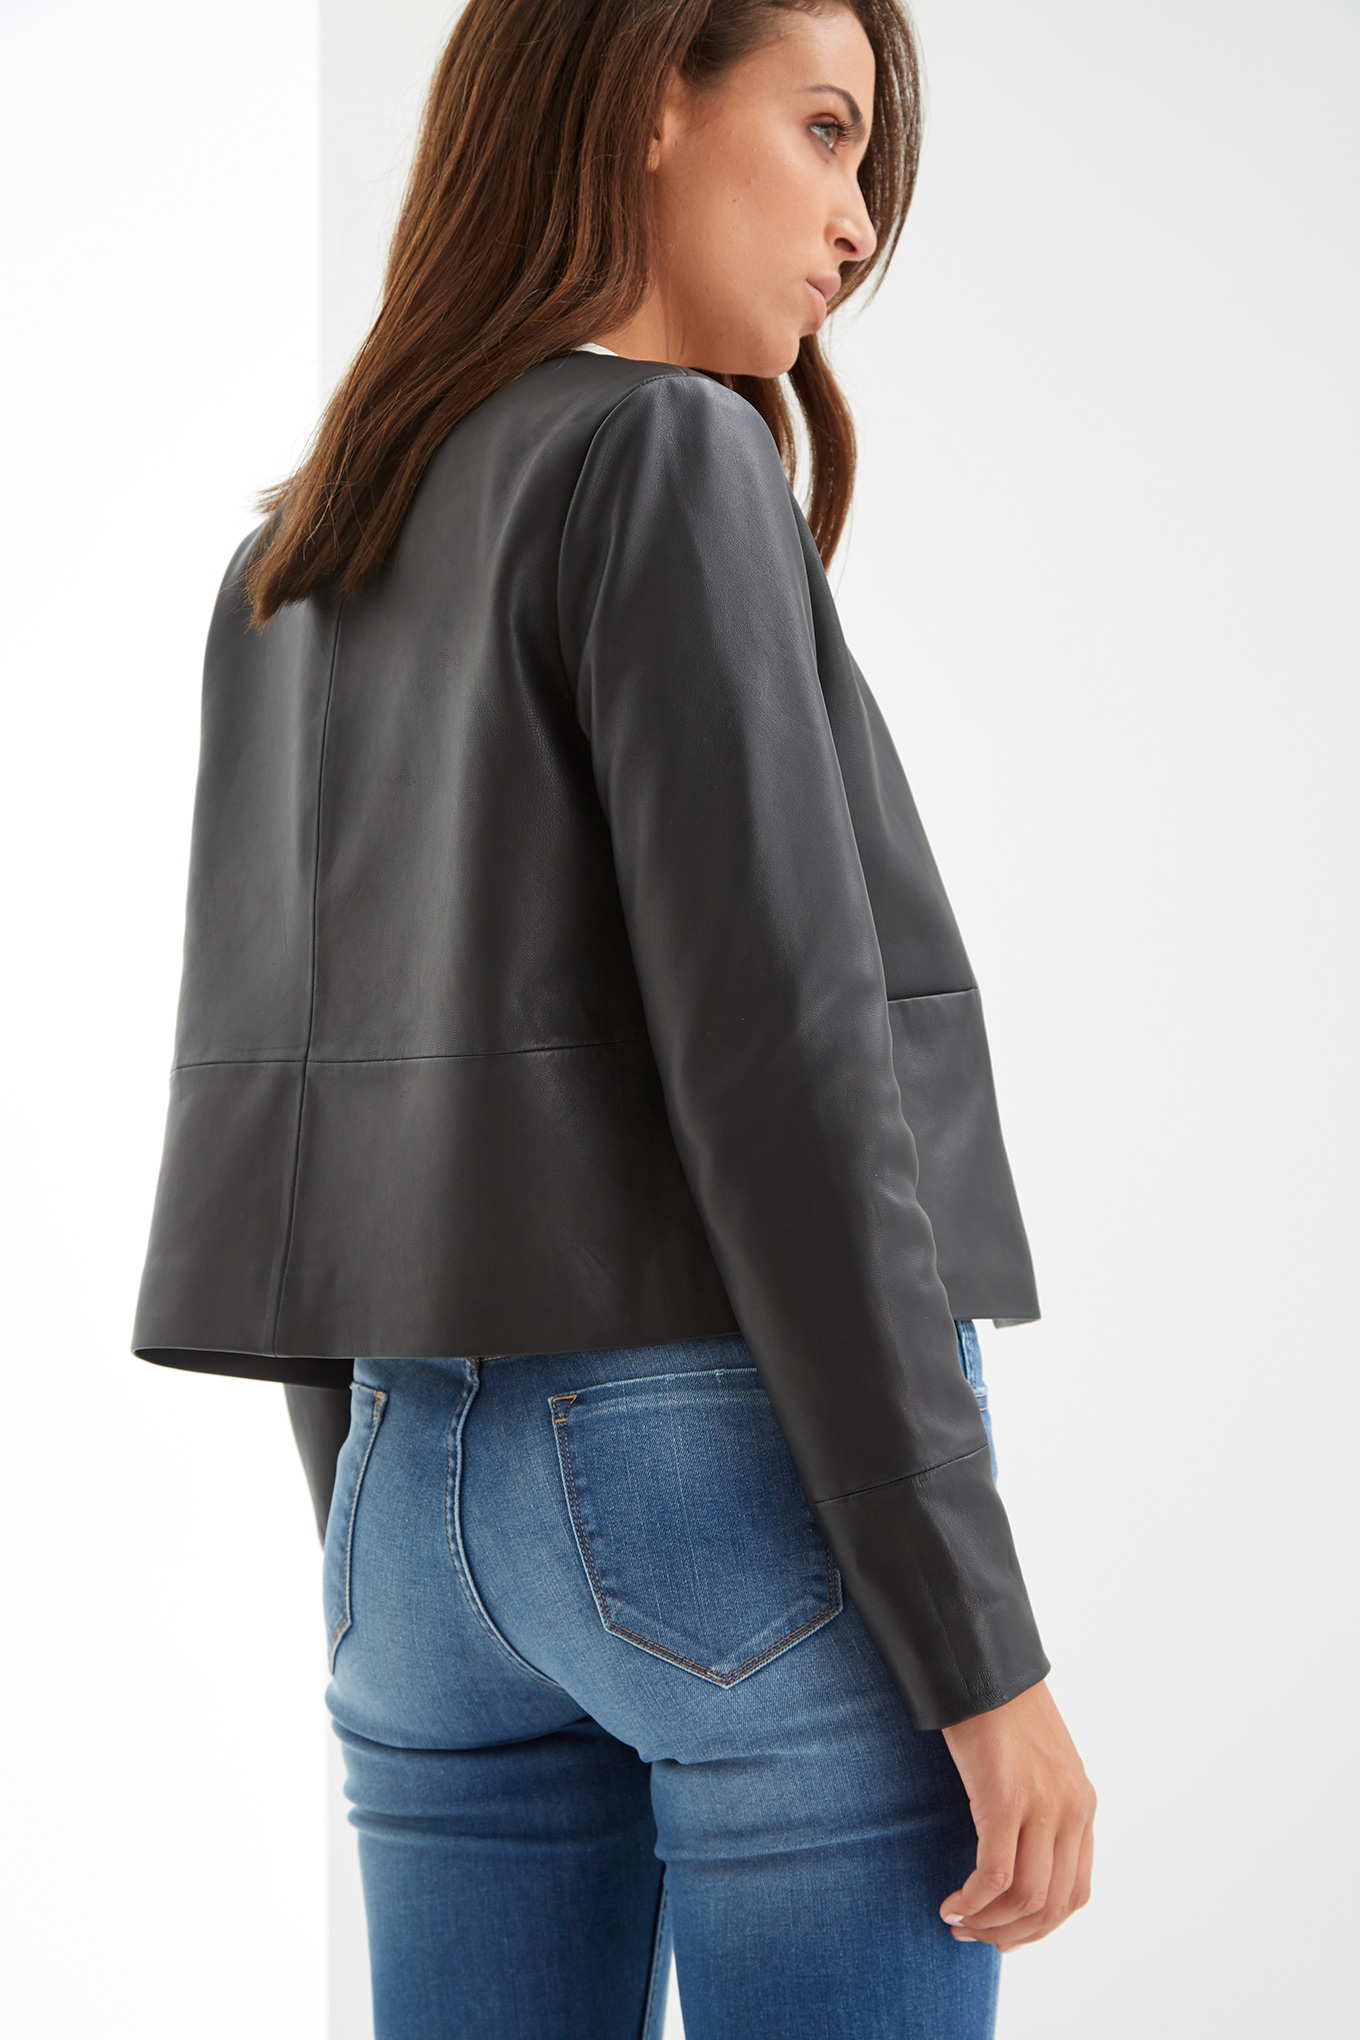 Leather Jacket Black Casual Woman